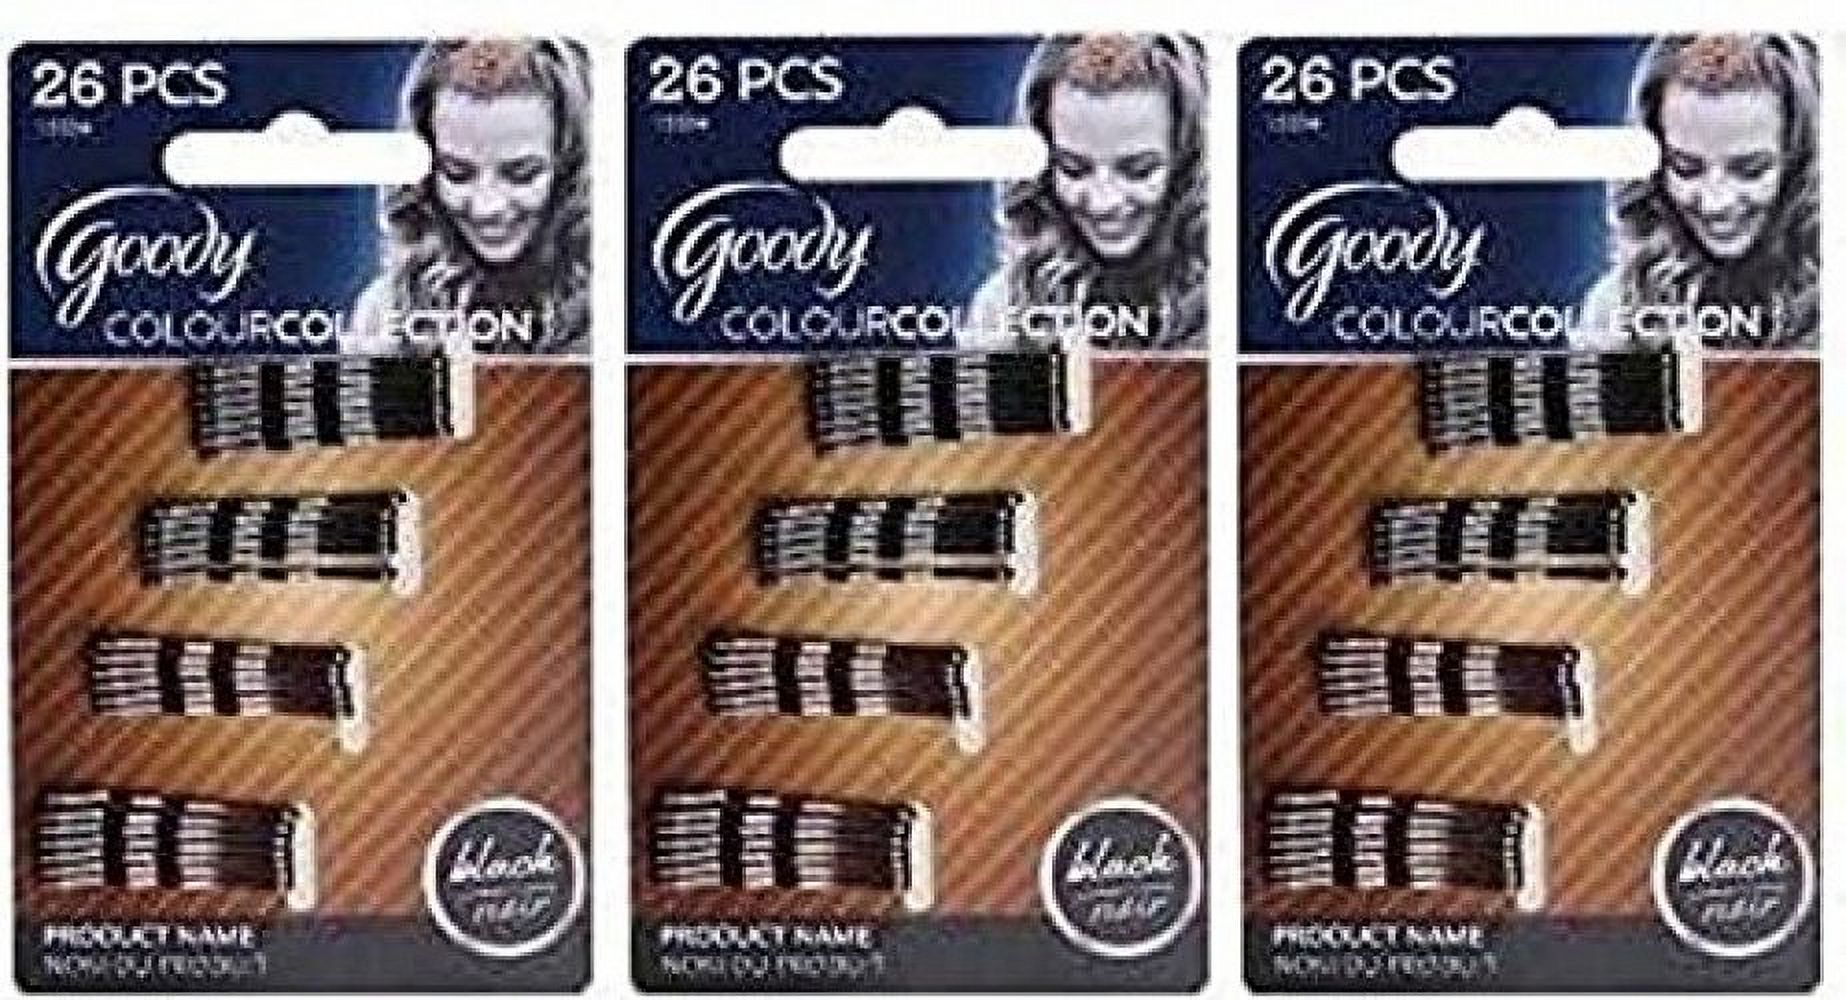 Goody Colour Collection Mini Bobby Pins Metallic - Color: Black- 3 Packs of 26 Count = 78 - image 1 of 2